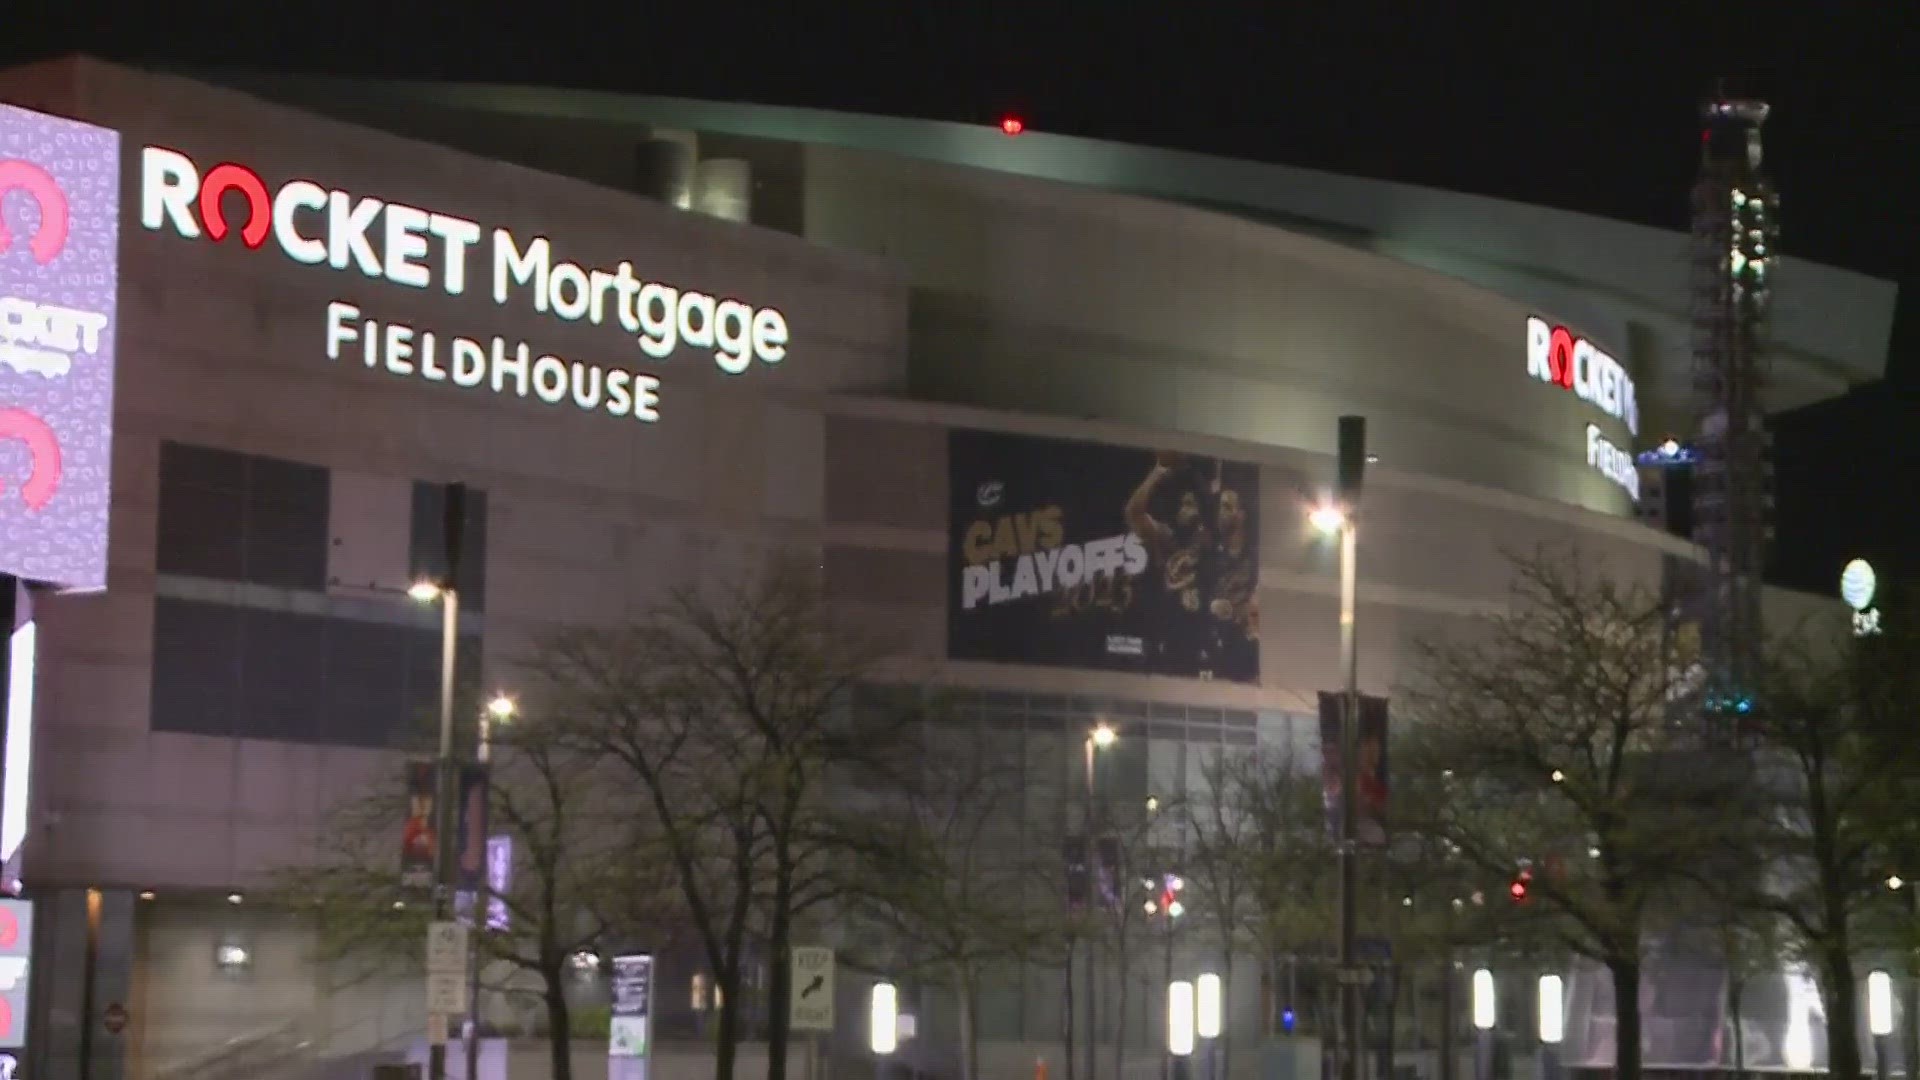 Cleveland Cavaliers to host watch party at Rocket Mortgage FieldHouse